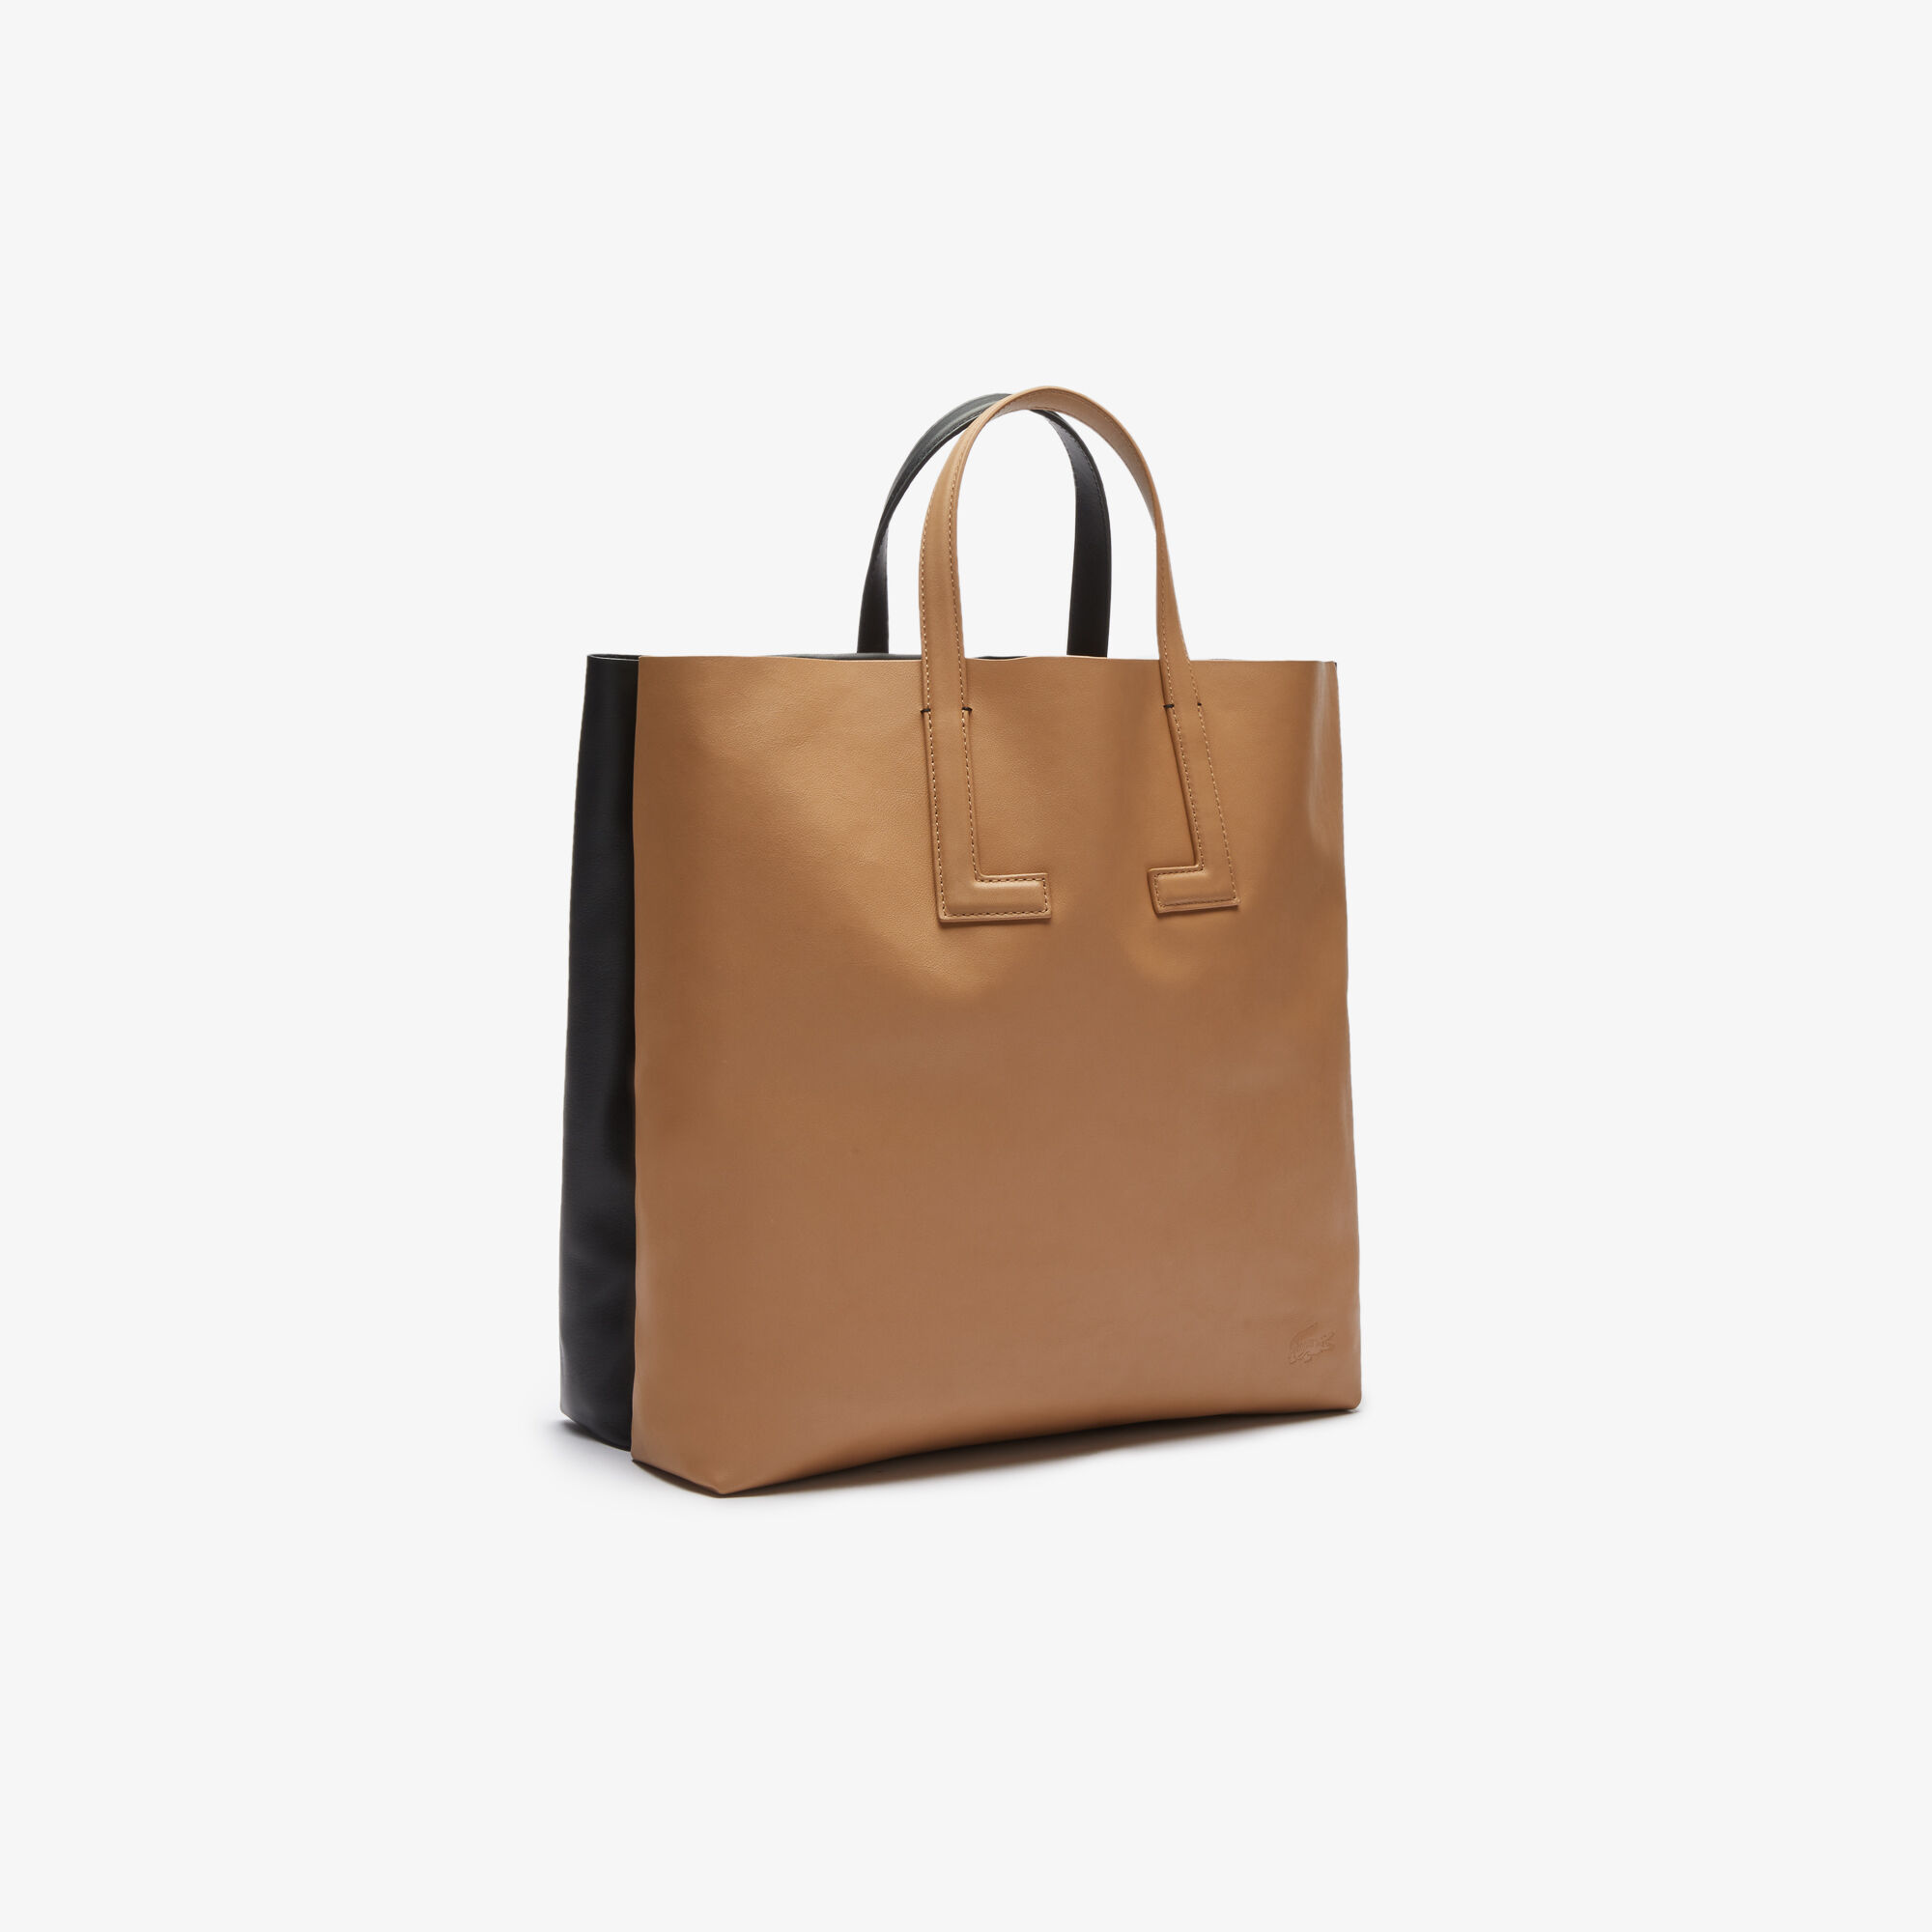 Women's Fashion Show Two-Tone Leather Double Tote